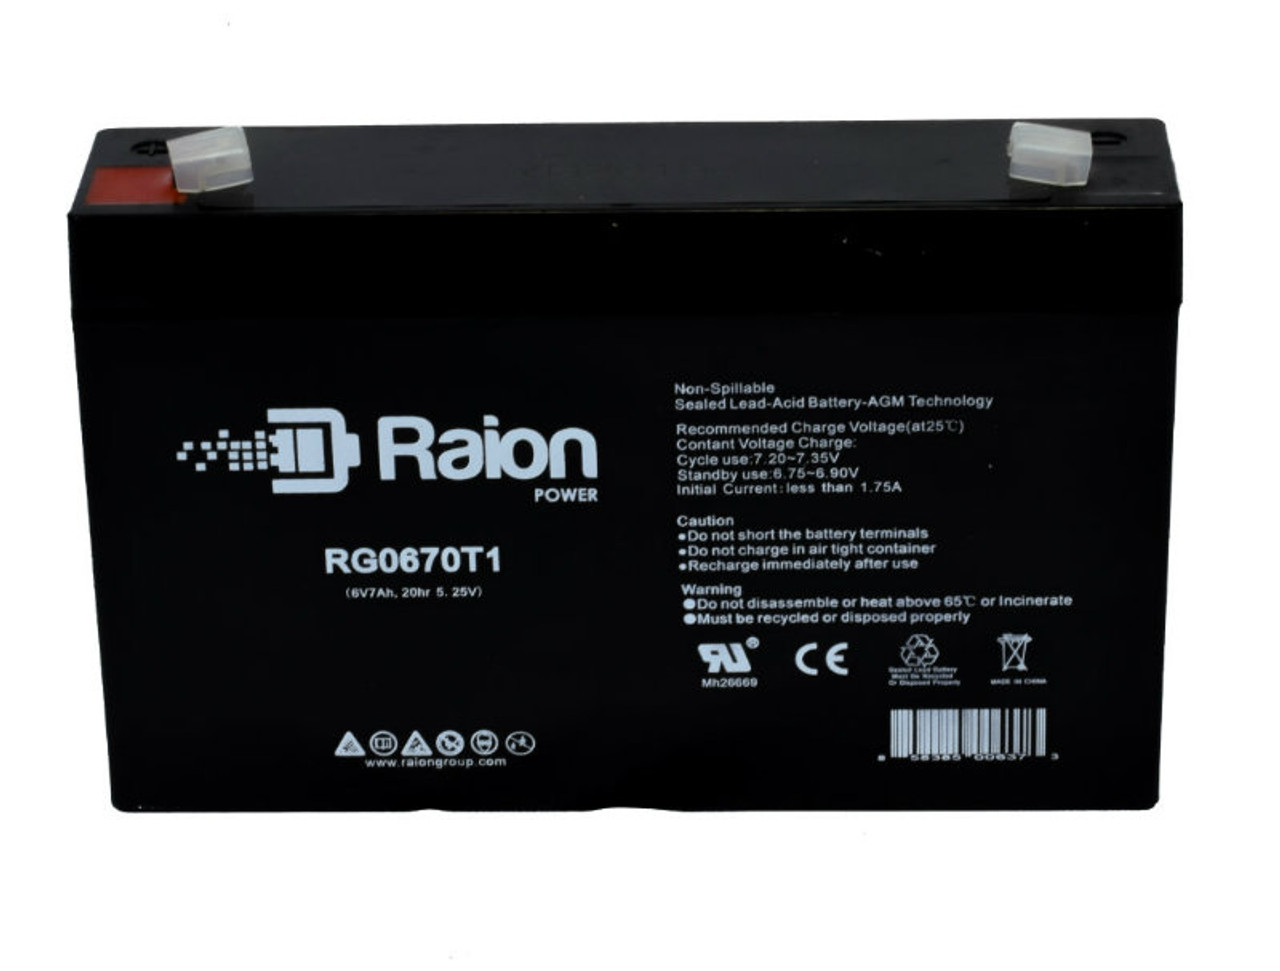 Raion Power RG0670T1 Replacement Battery Cartridge for Sure-Lites / Cooper Lighting SL-26-45